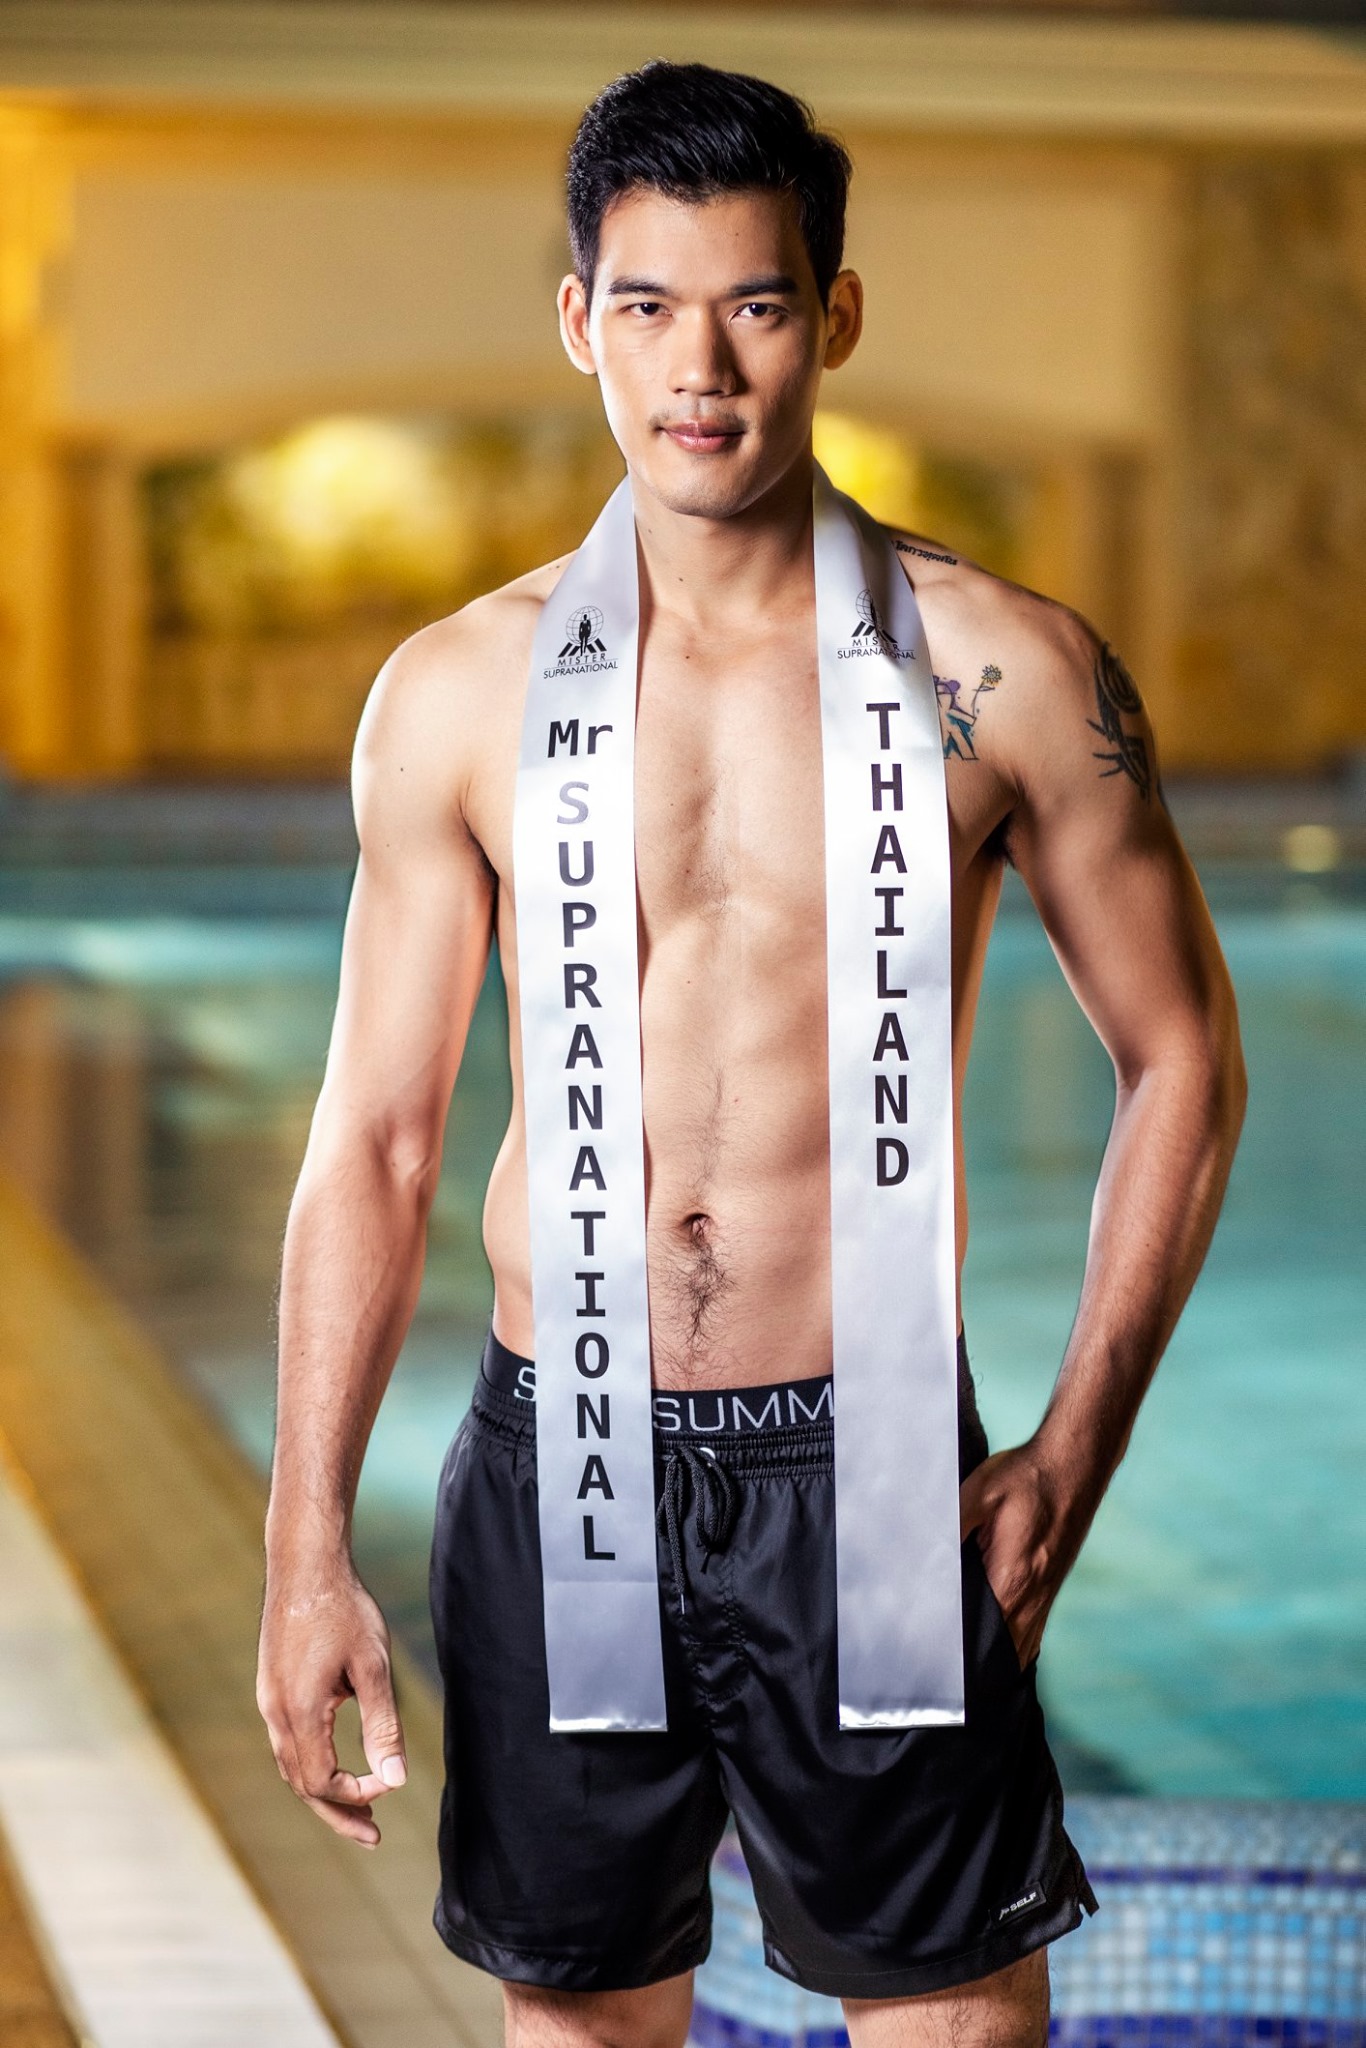 Mister Supranational 2019 Official Swimwear 017